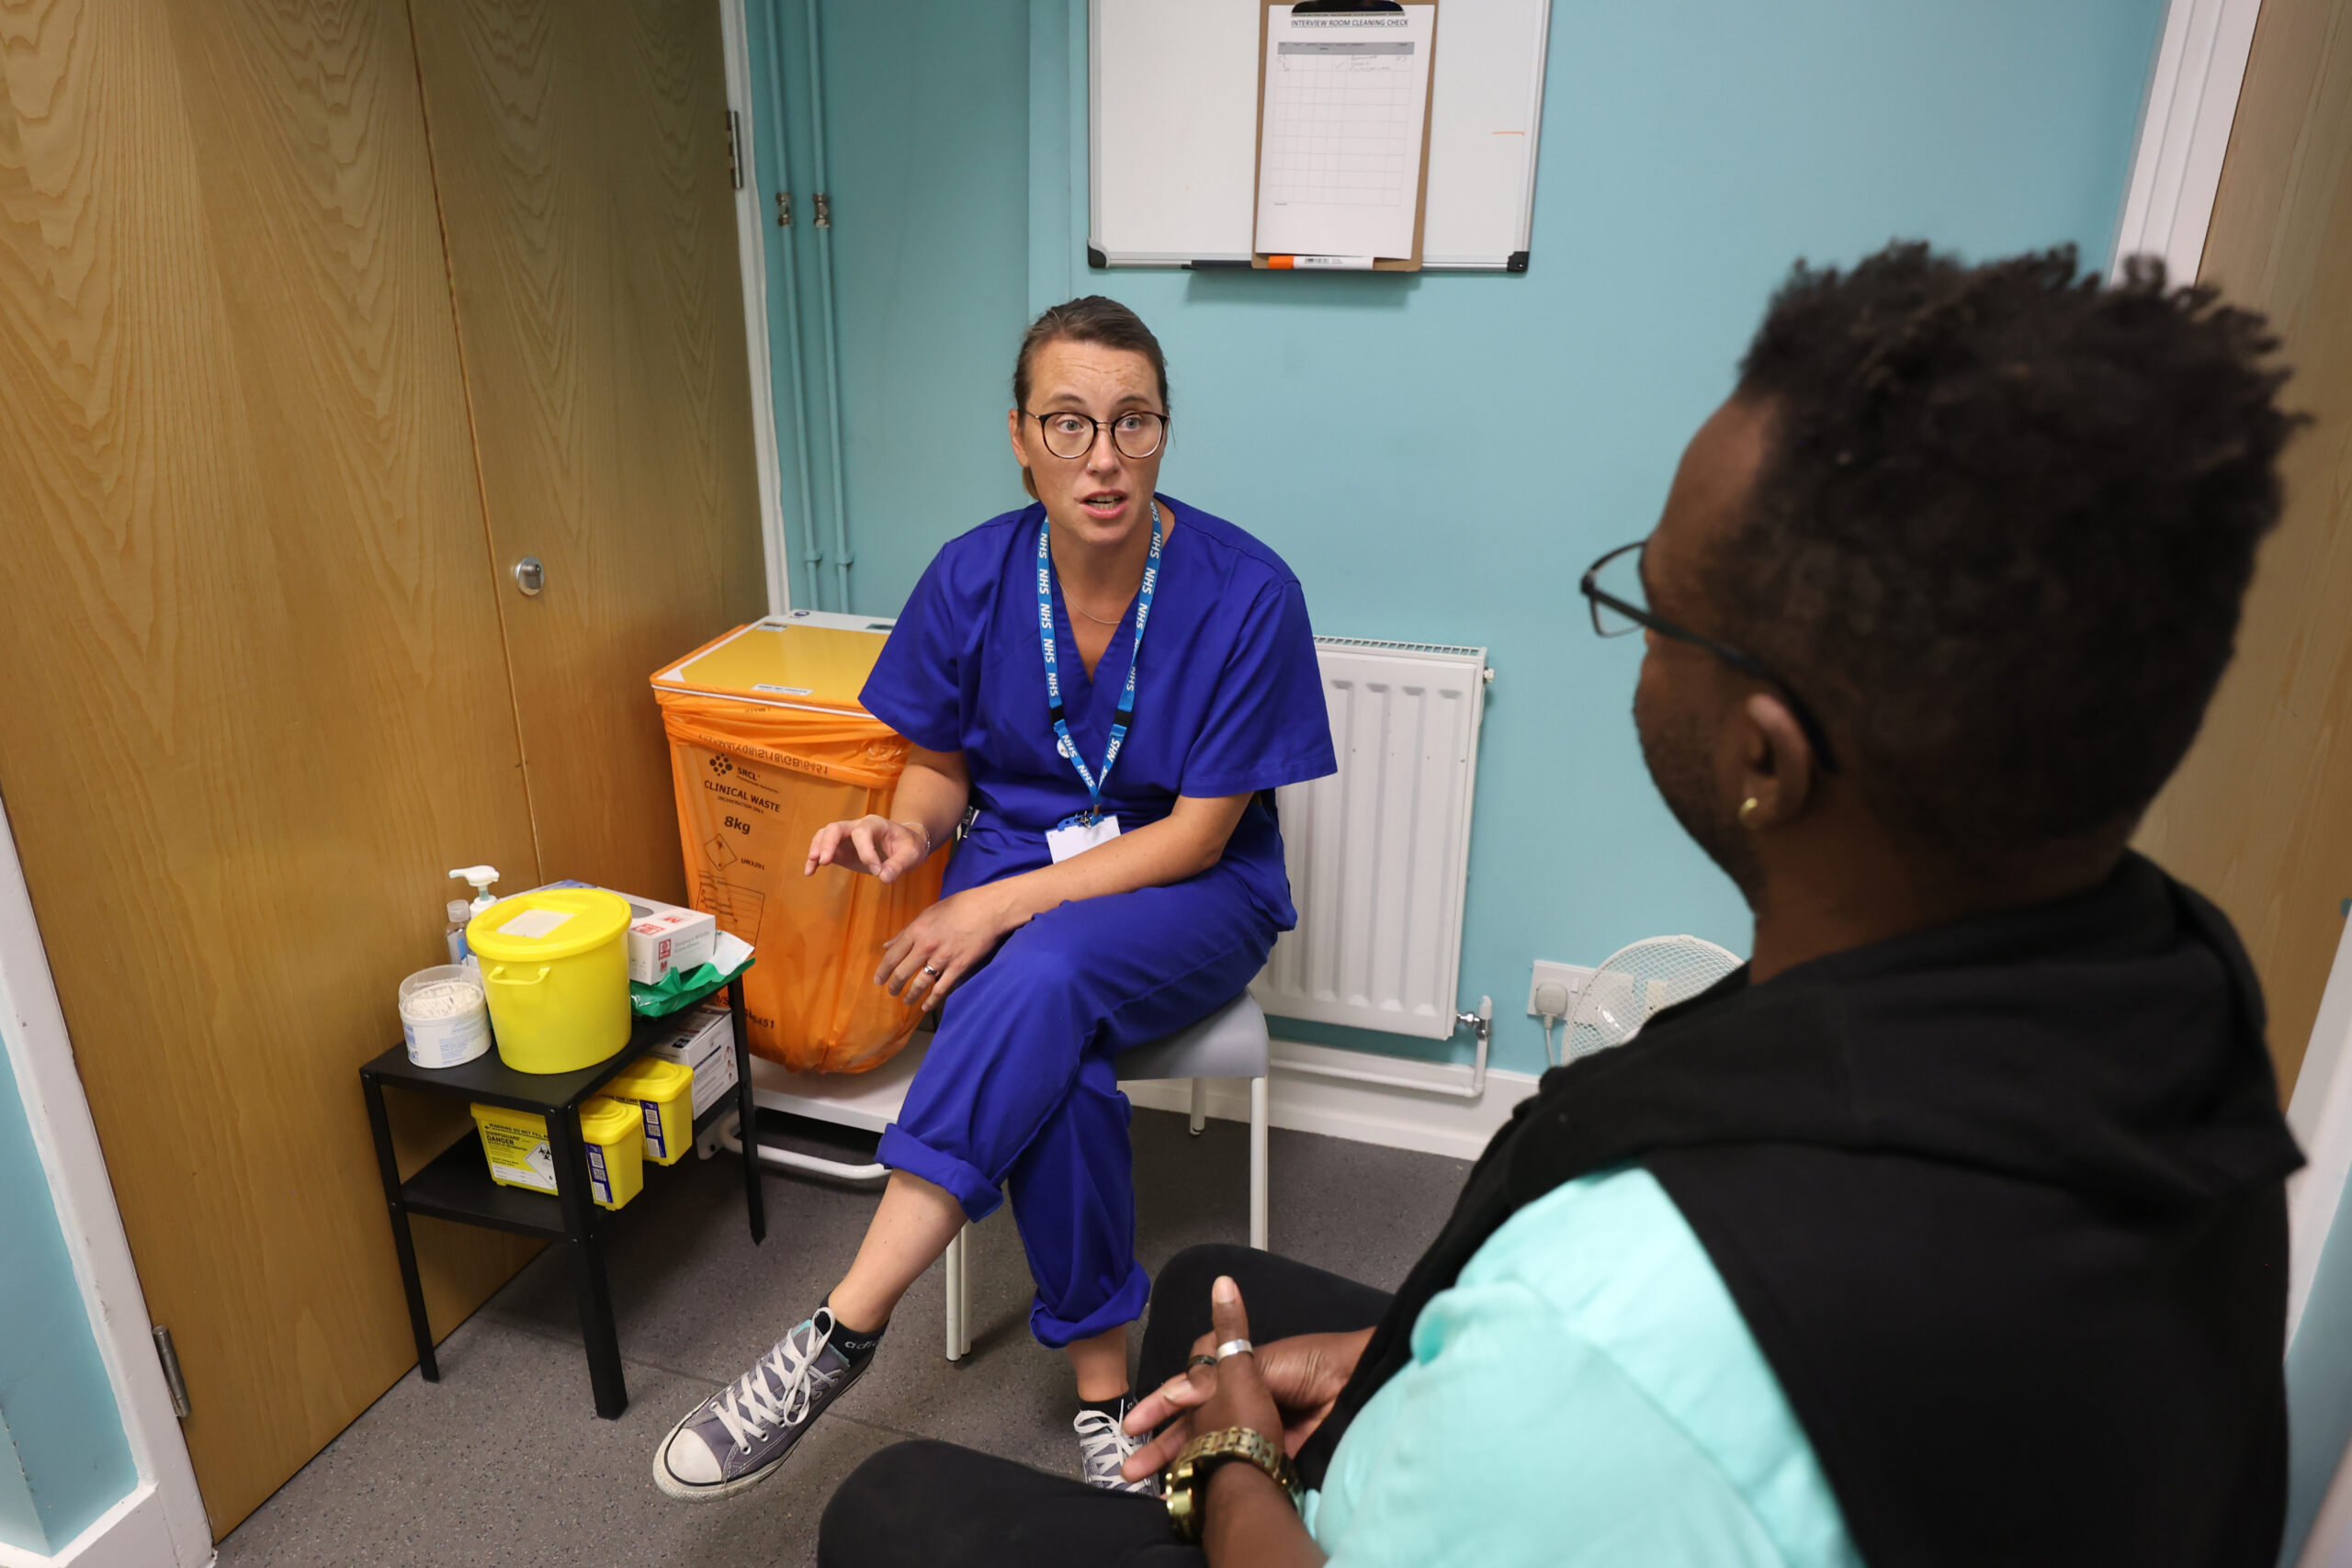 A patient and nurse talking to each other in a consultation room